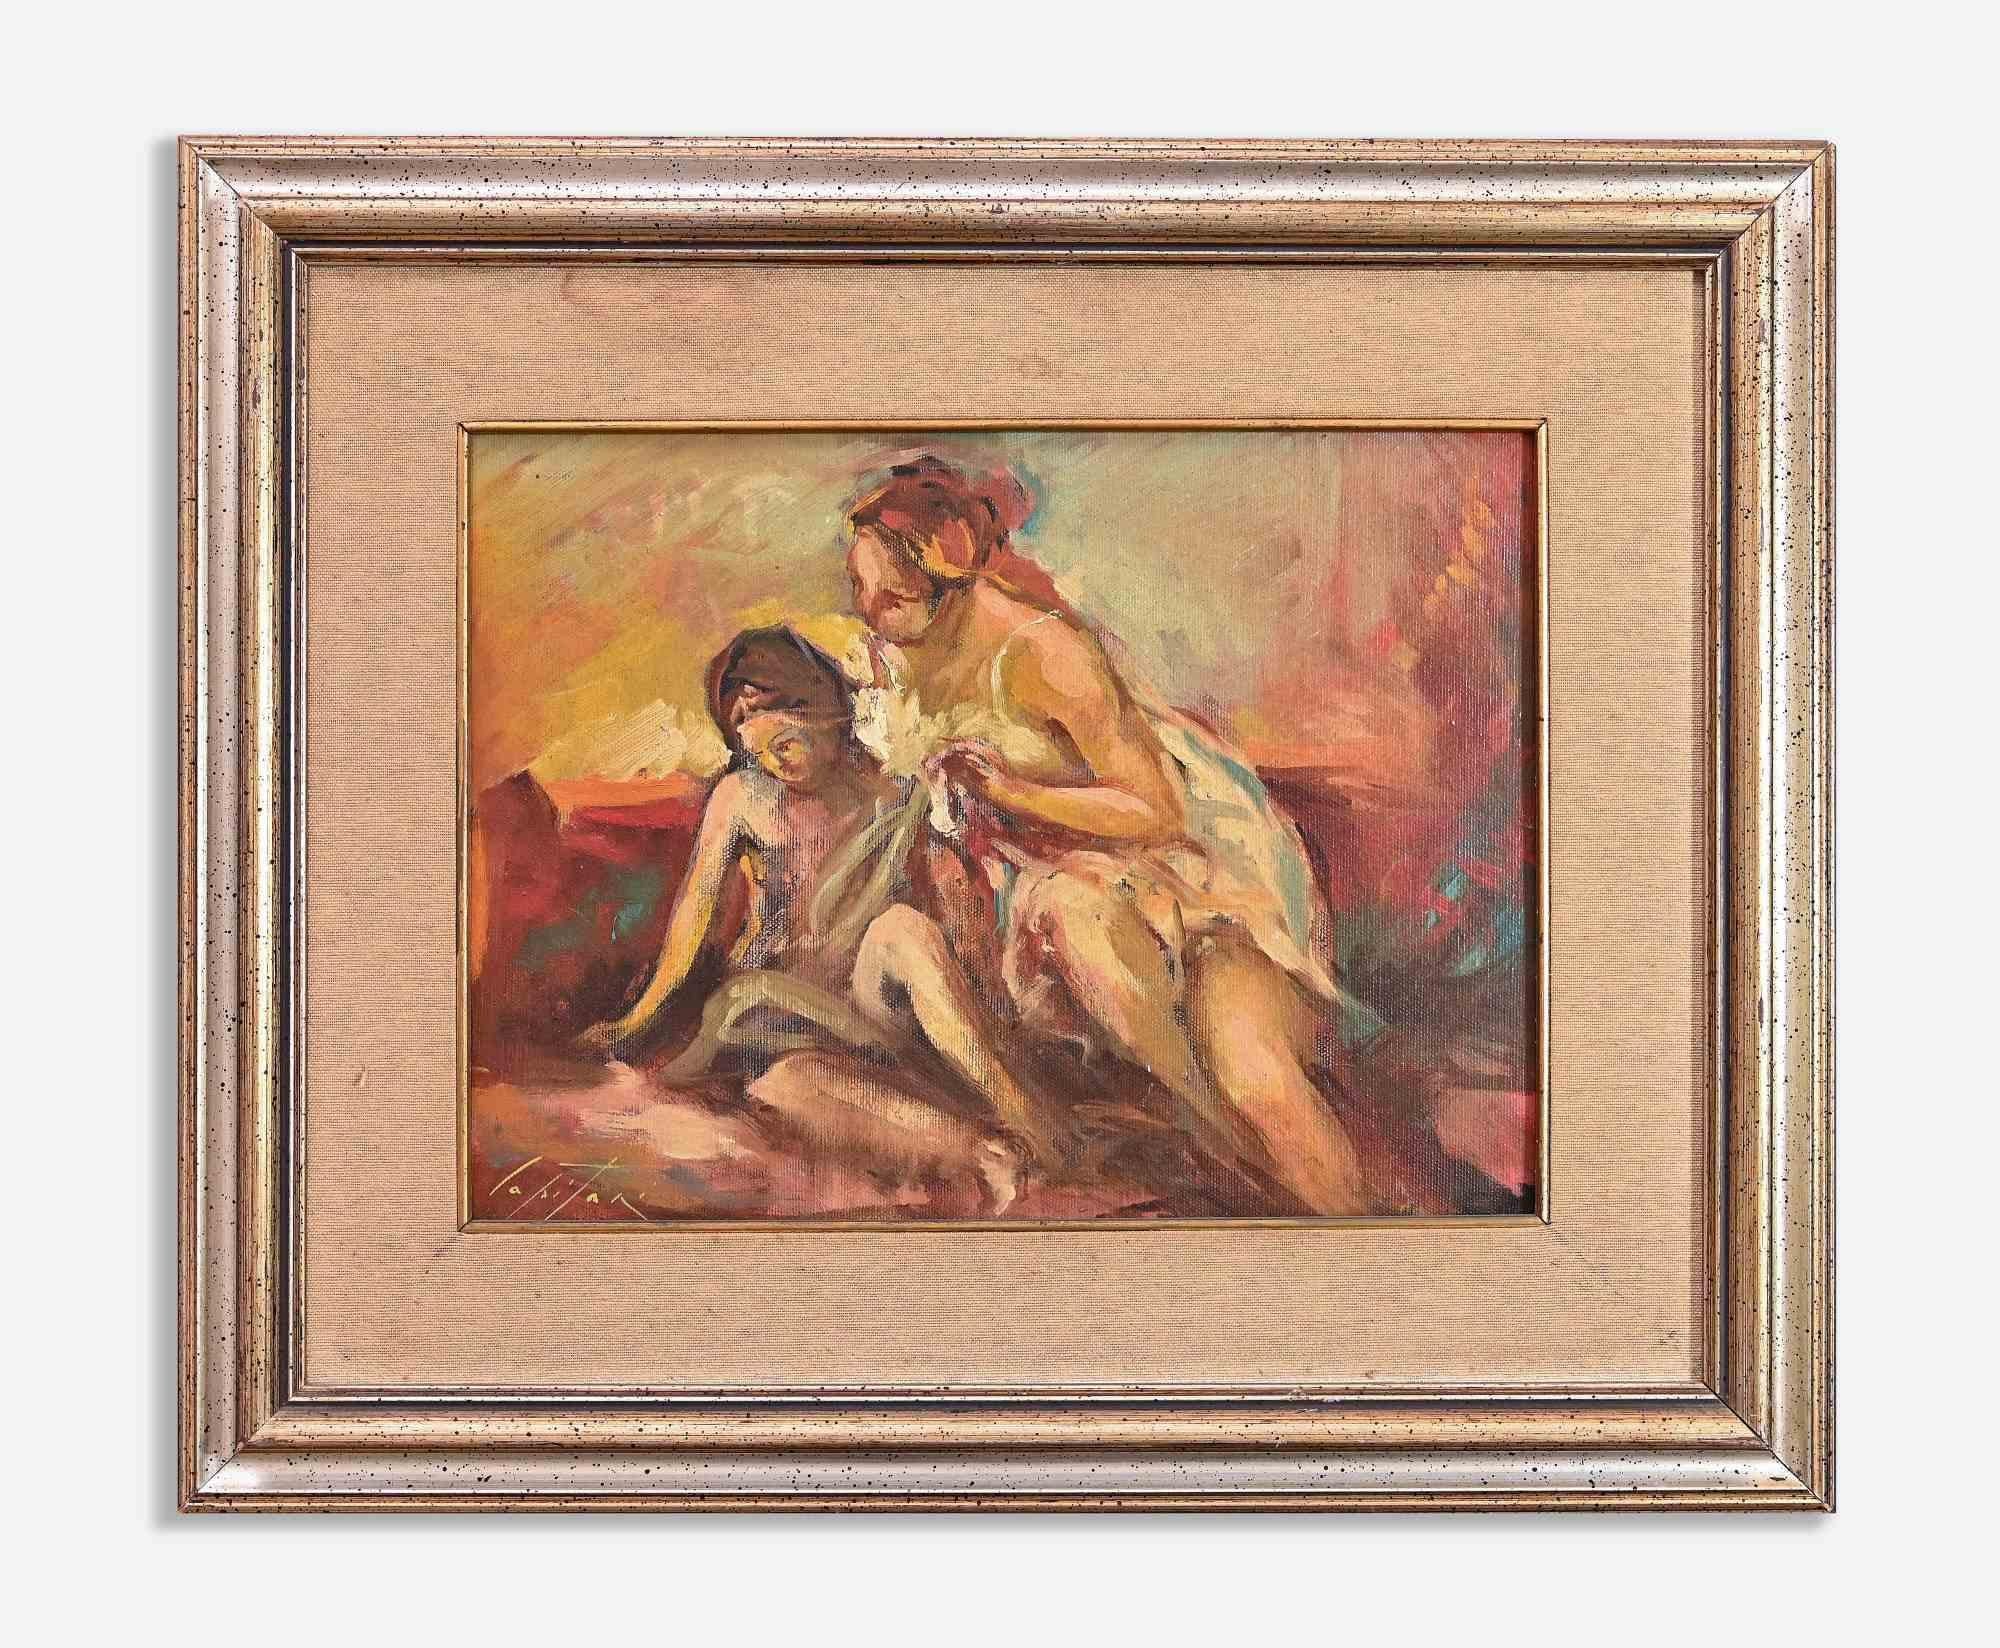 Sulking is an original modern artwork realized by the artist Sergio Capitani in 1977

Mixed colored oil on board.

Hand signed on the lower left margin.

Authenticity label on the back.

Includes frame: 48.5 x 3 x 58.5 cm